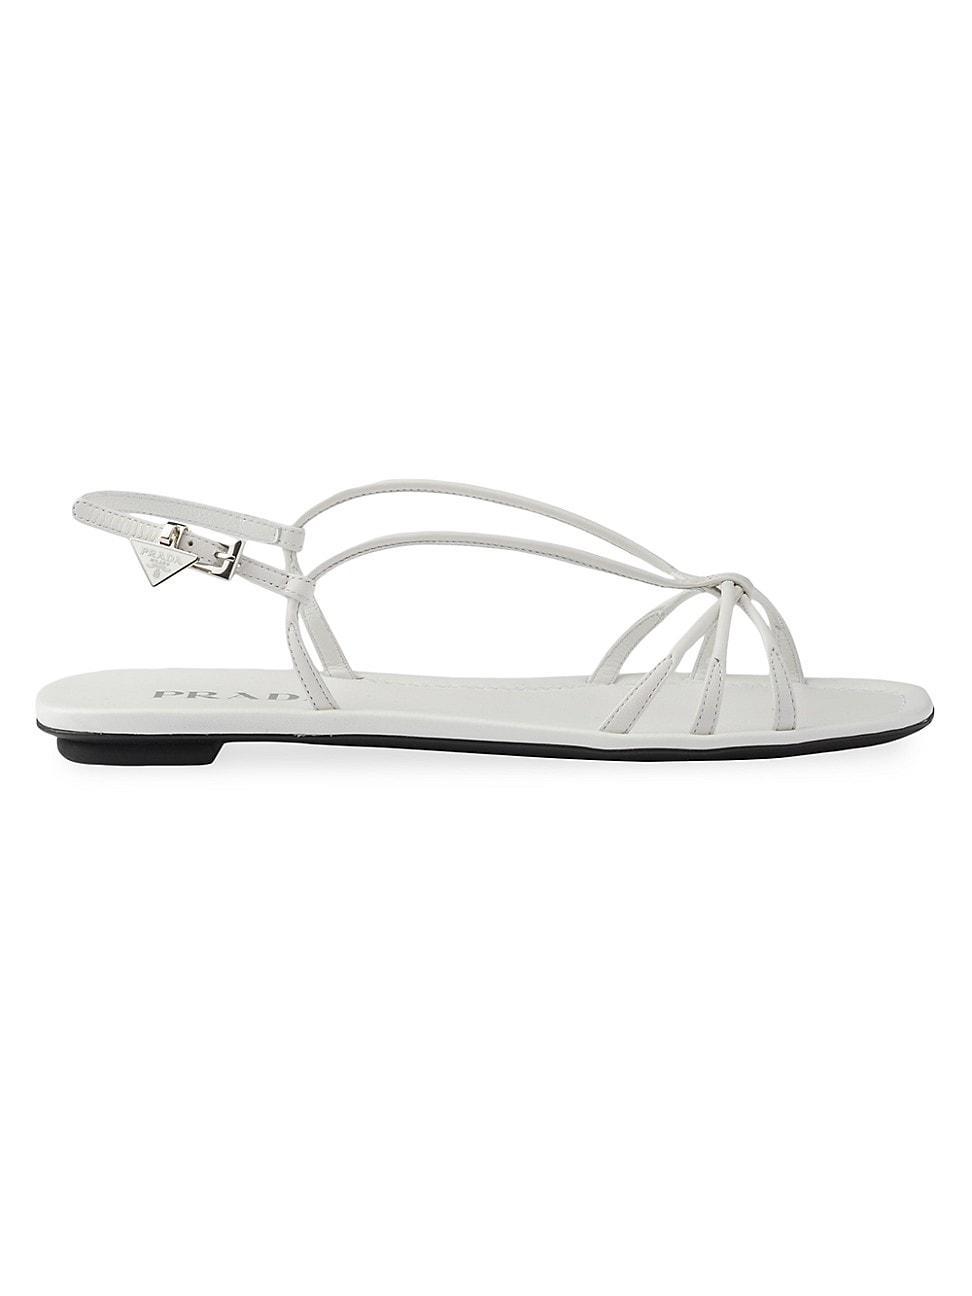 Womens Flat Leather Sandals Product Image